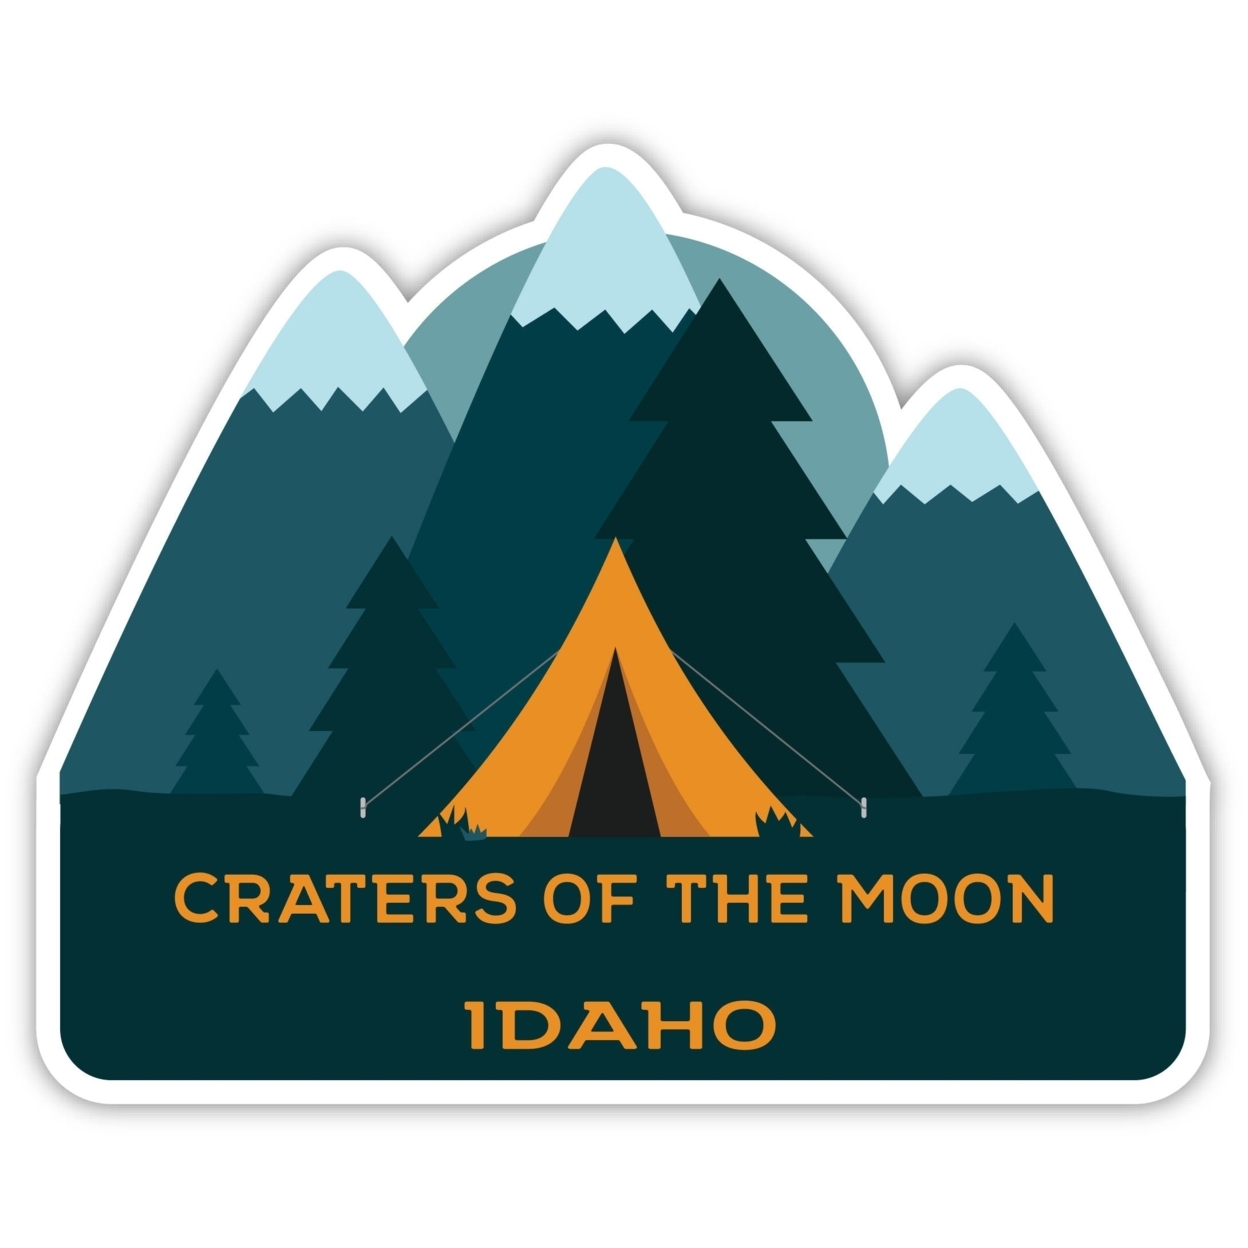 Craters Of The Moon Idaho Souvenir Decorative Stickers (Choose Theme And Size) - Single Unit, 2-Inch, Tent